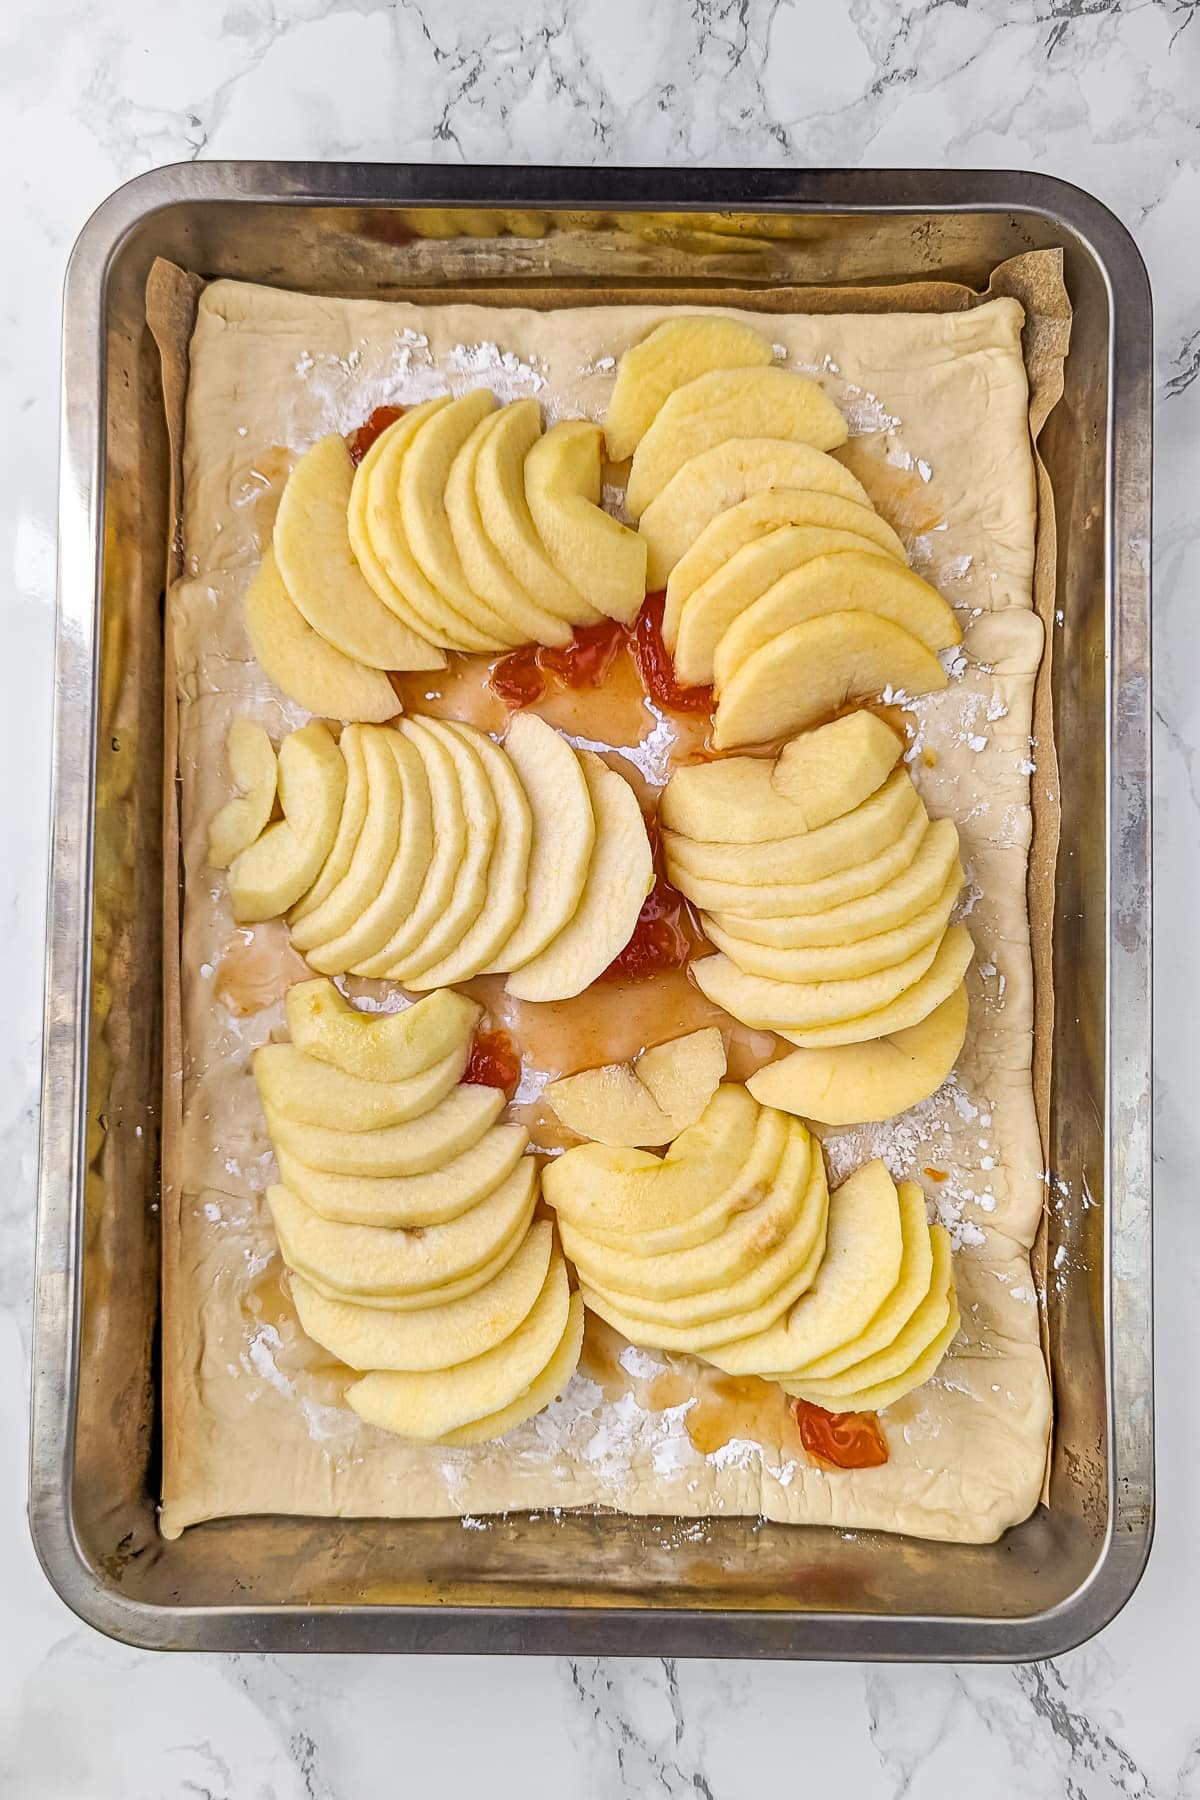 Sliced apples arranged in rows on the pie dough with apricot jam, beginning the tart's assembly.